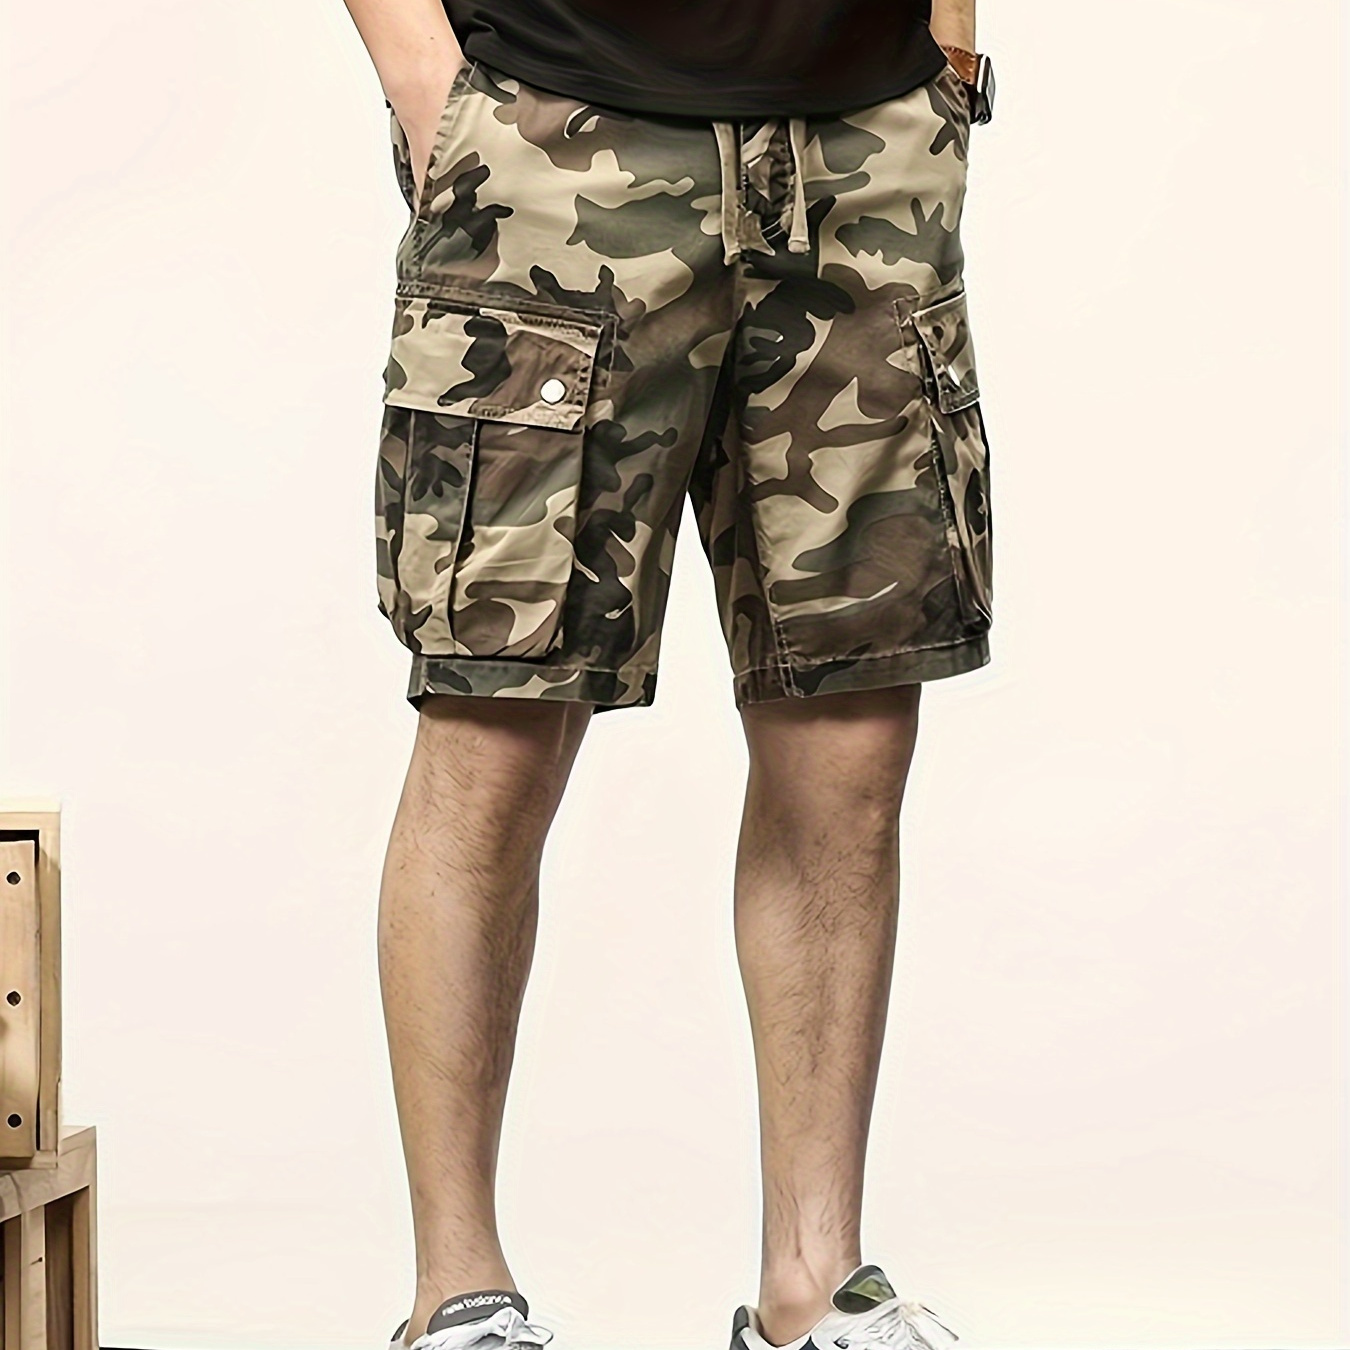 

Men's Loose Camouflage Pattern Cotton Elastic Waist Cargo Shorts With Pockets, Casual Breathable Shorts For Summer, Bermuda Shorts